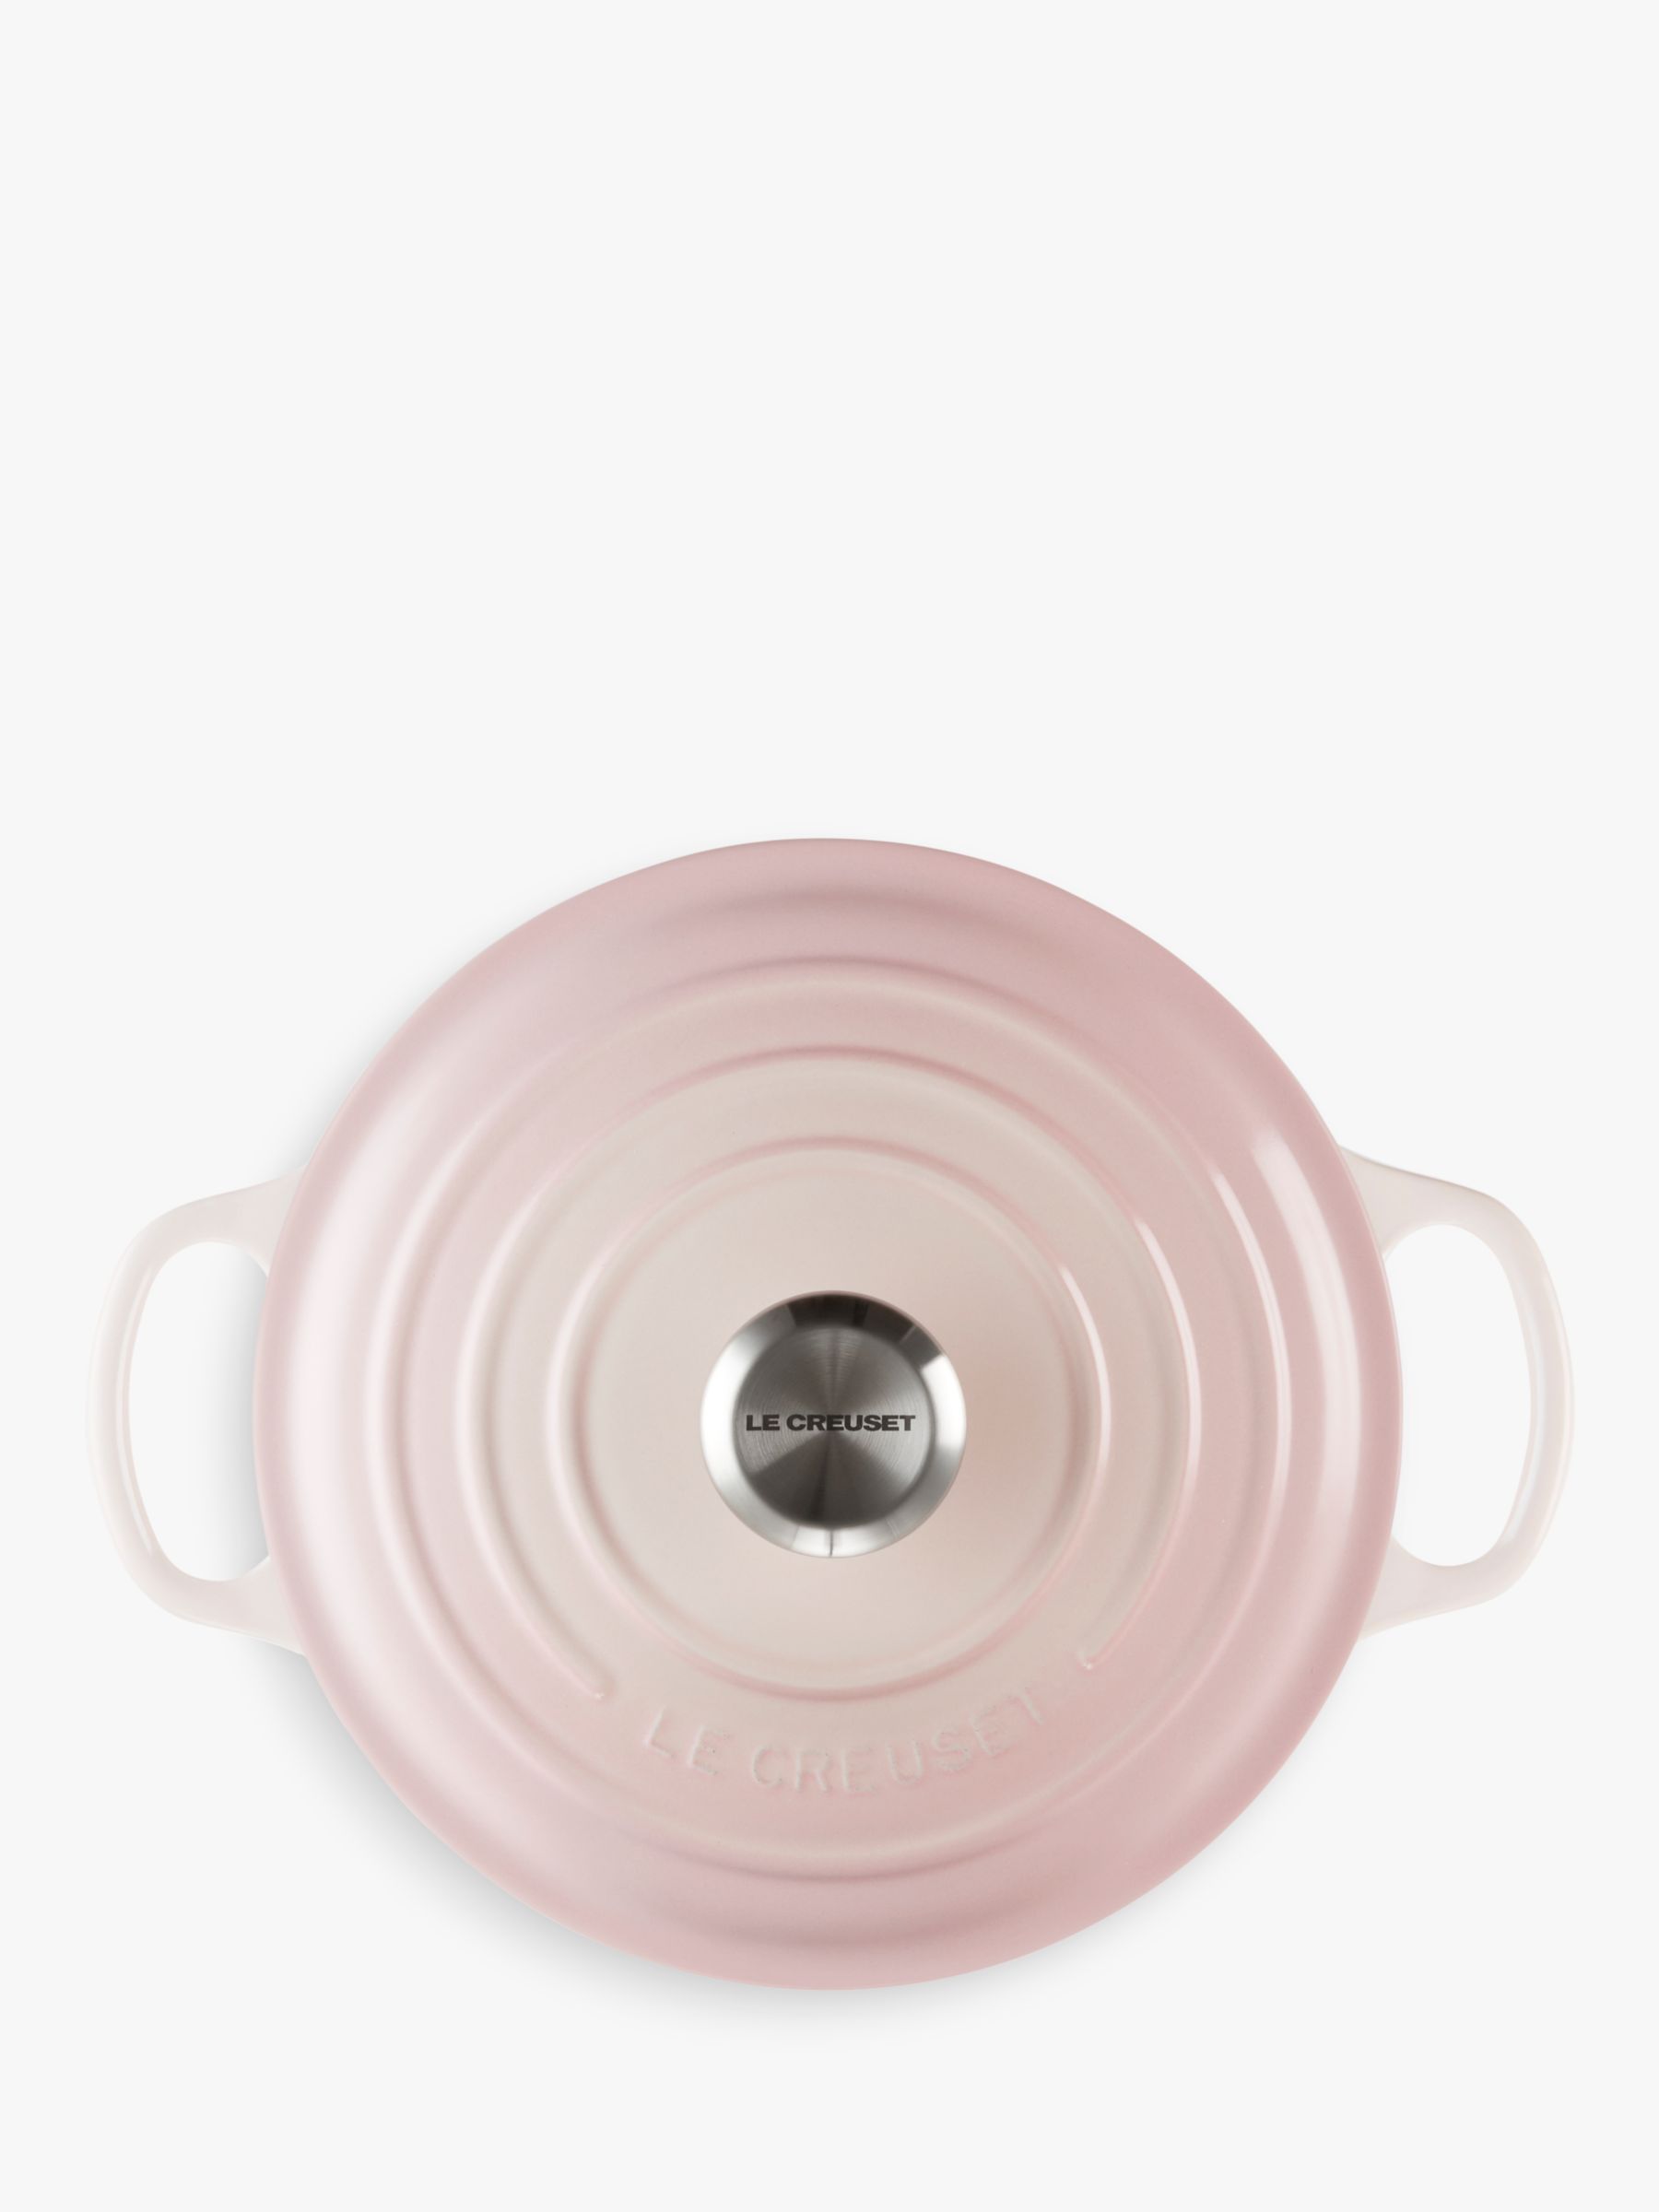 Le Creuset Set of 2 Handle Grips Shell Pink